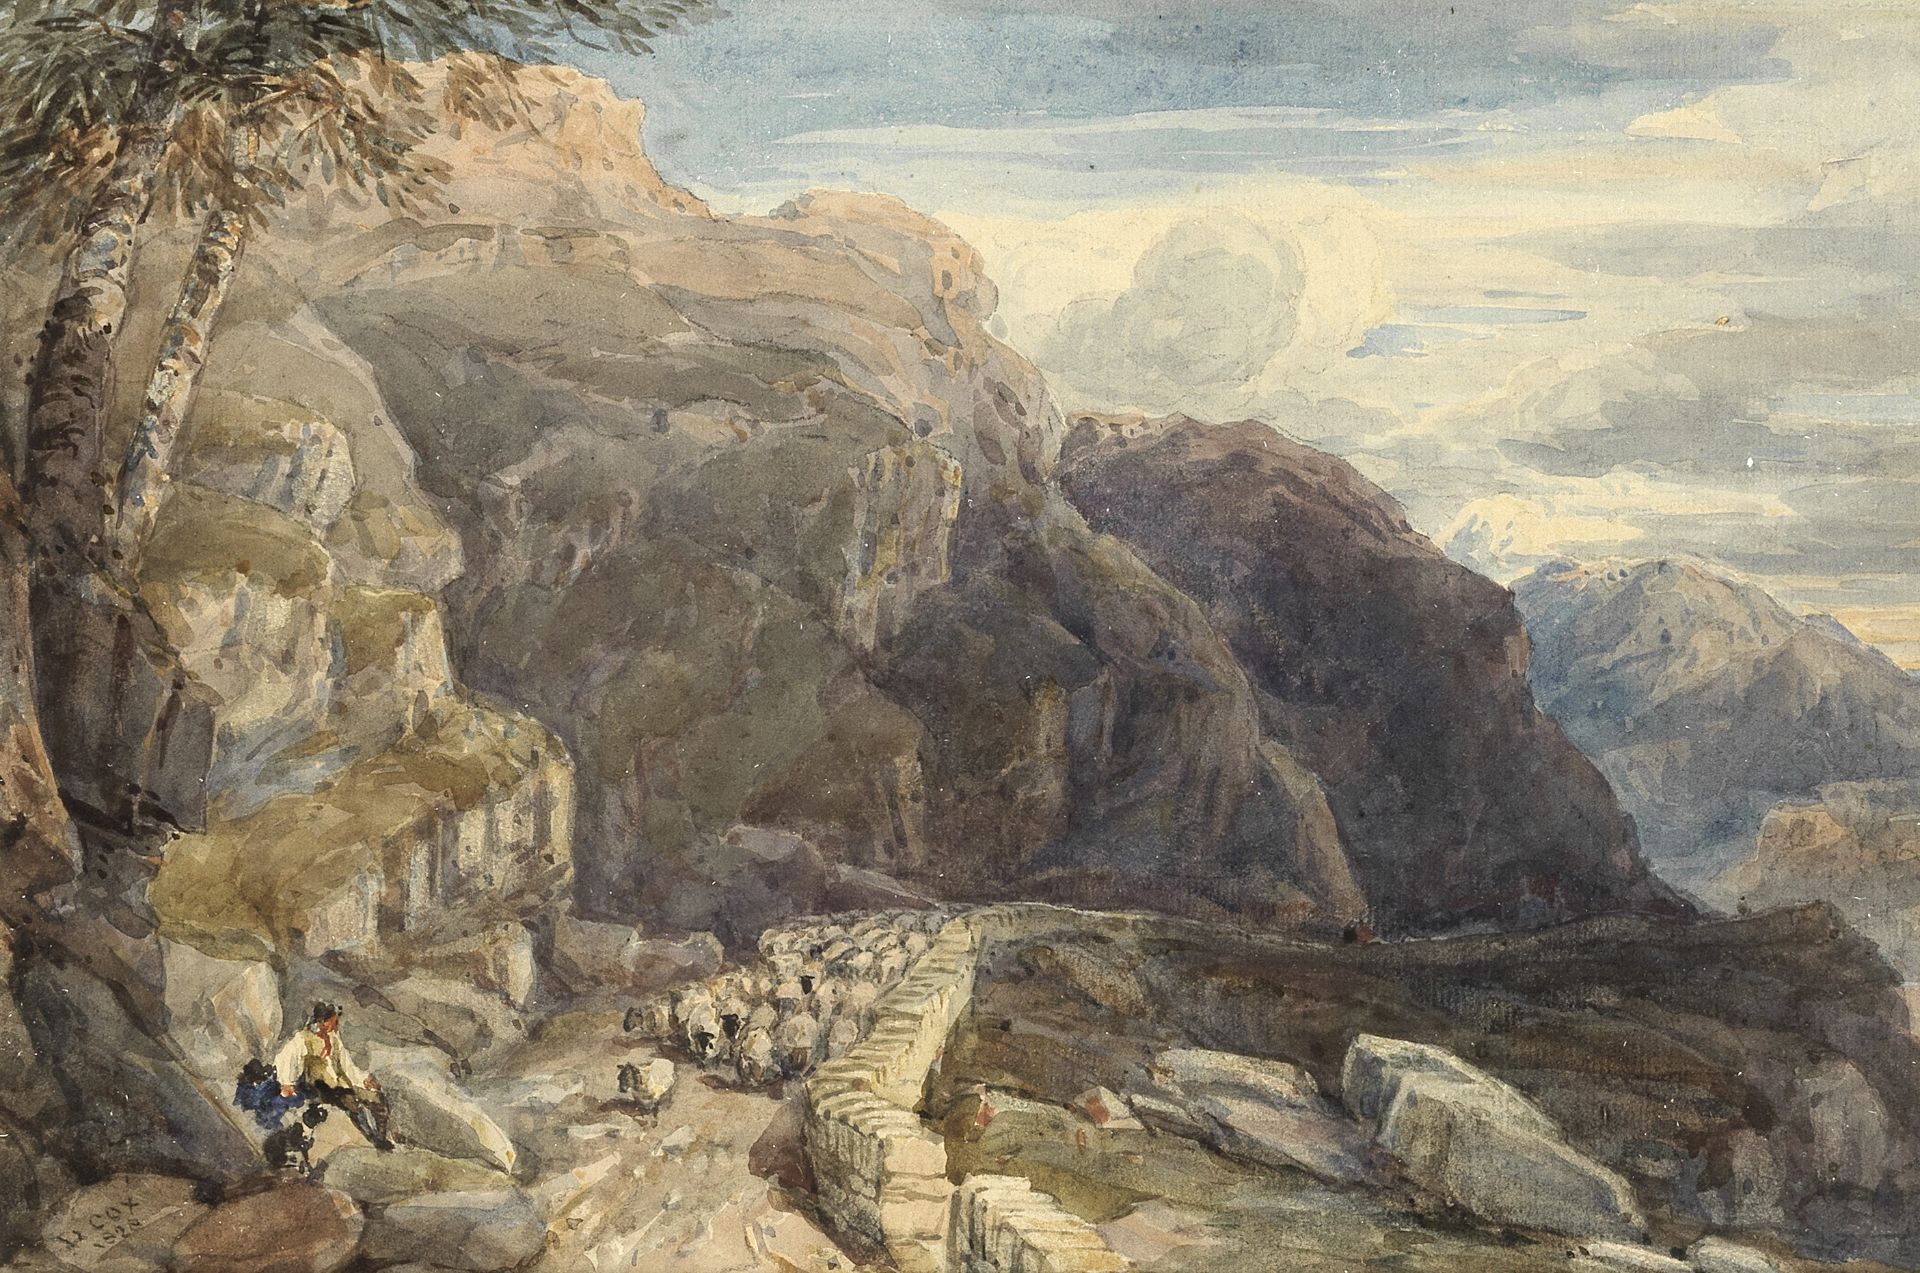 David Cox Snr. O.W.S. (British, 1783-1859) Shepherd and his Flock on a Mountain Road, Wales